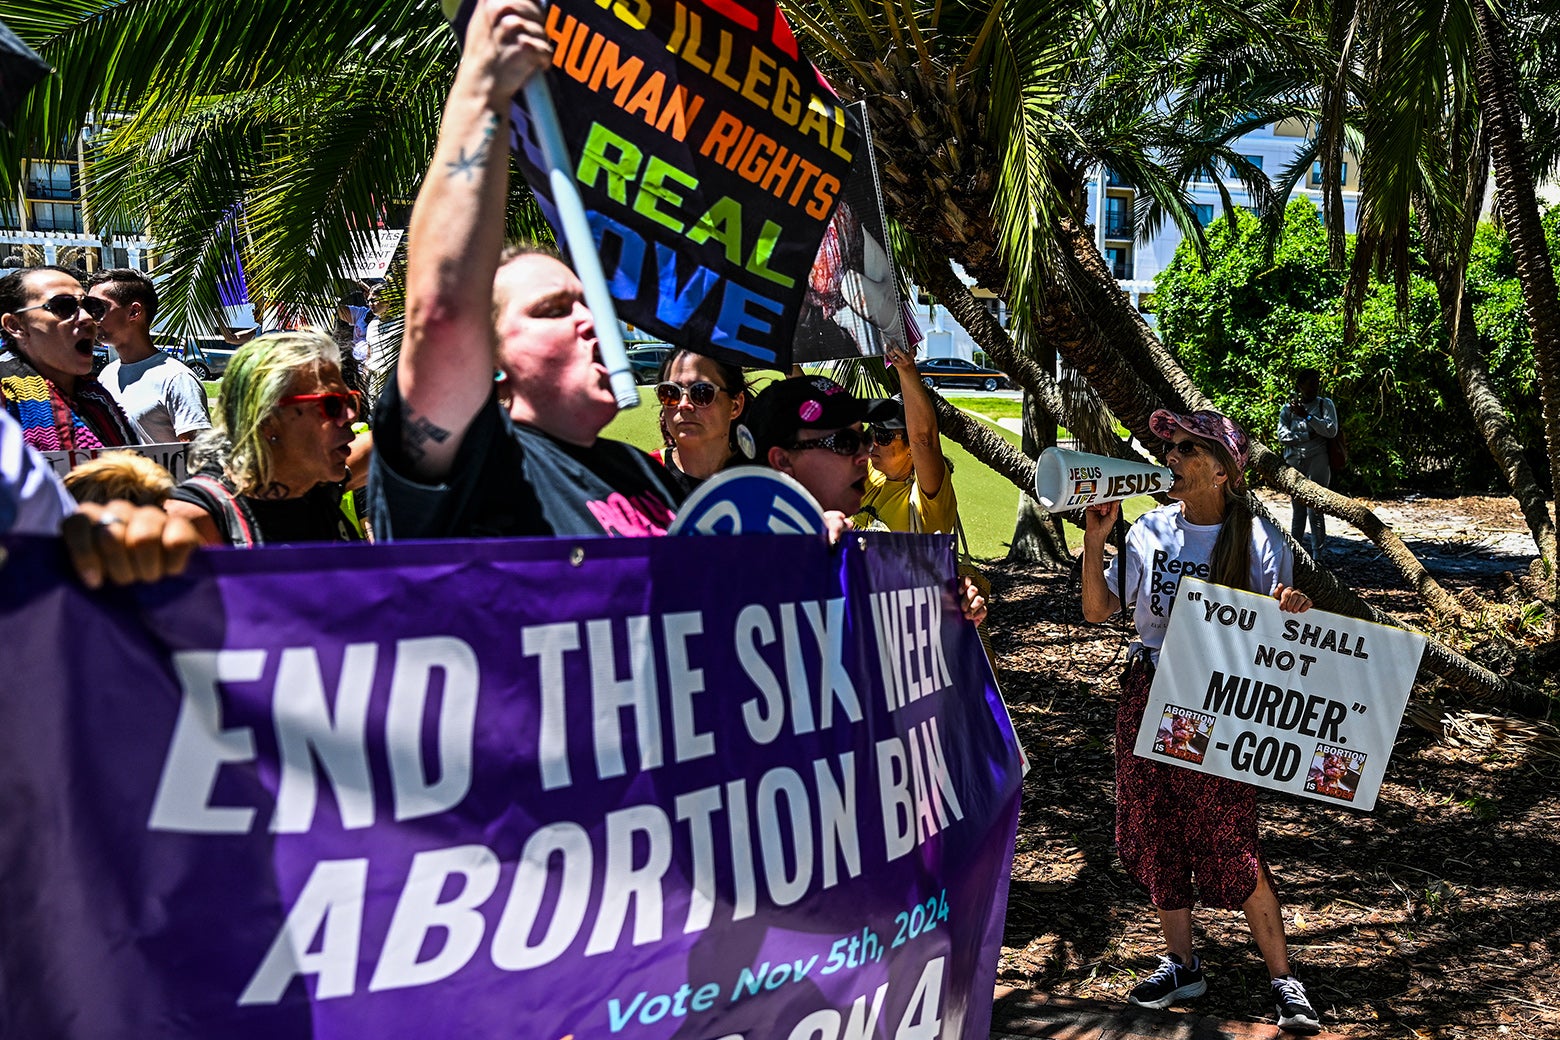 A group of anti-abortion activists protest near the 